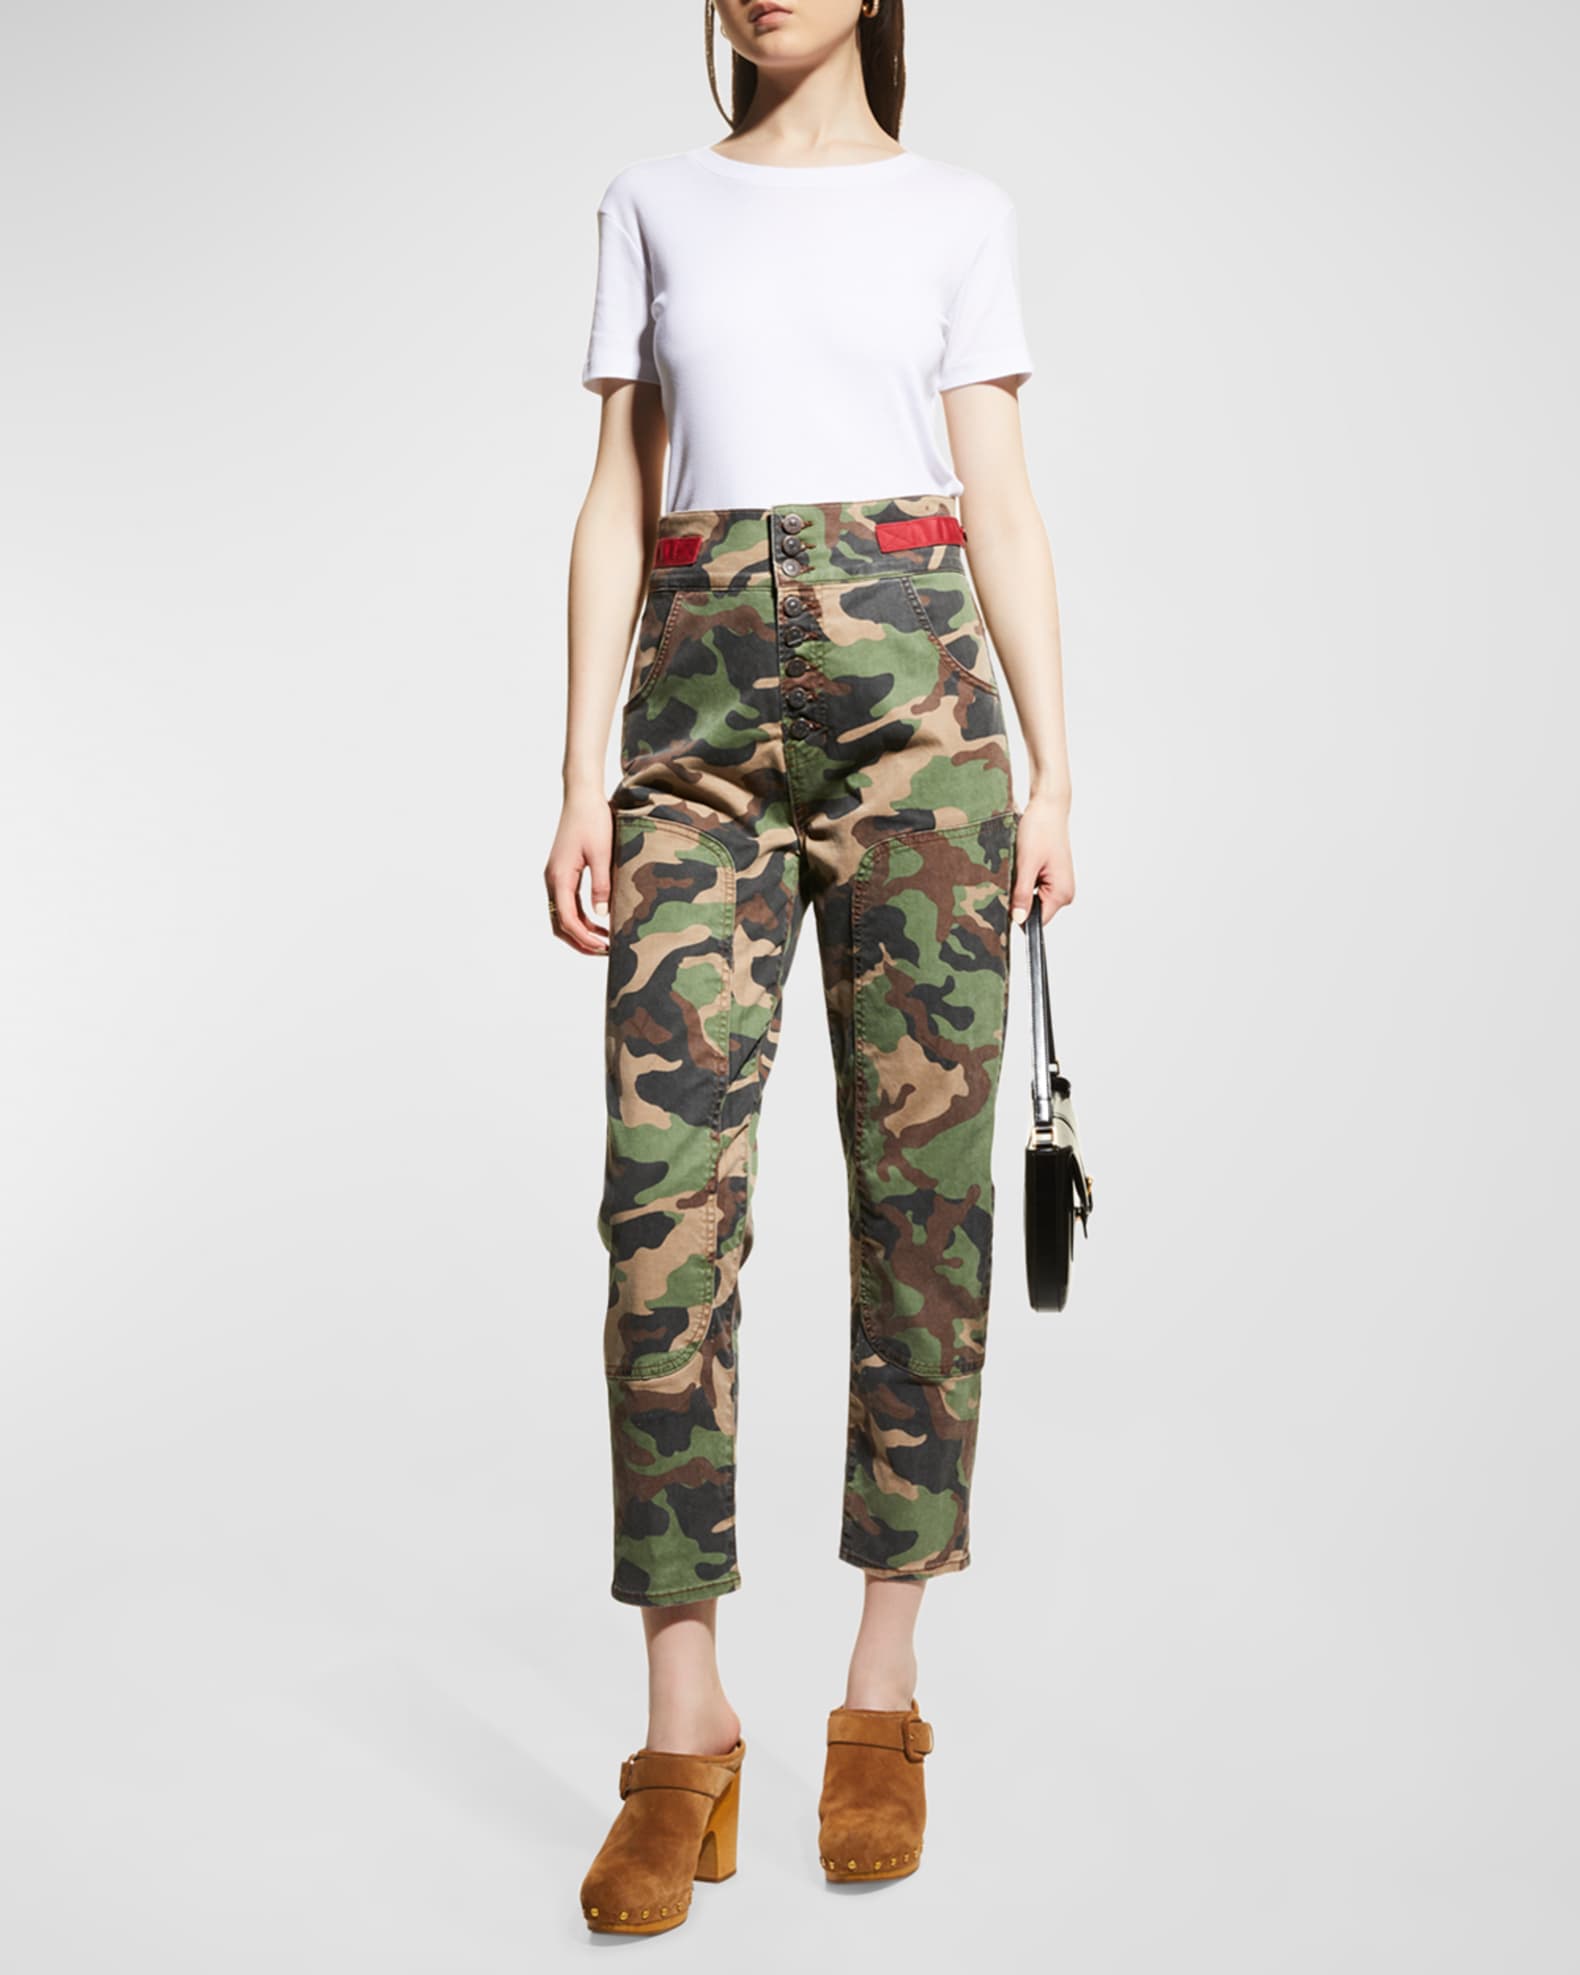 Veronica Beard Jeans Kane Camouflage Straight Cropped Pants | Neiman Marcus